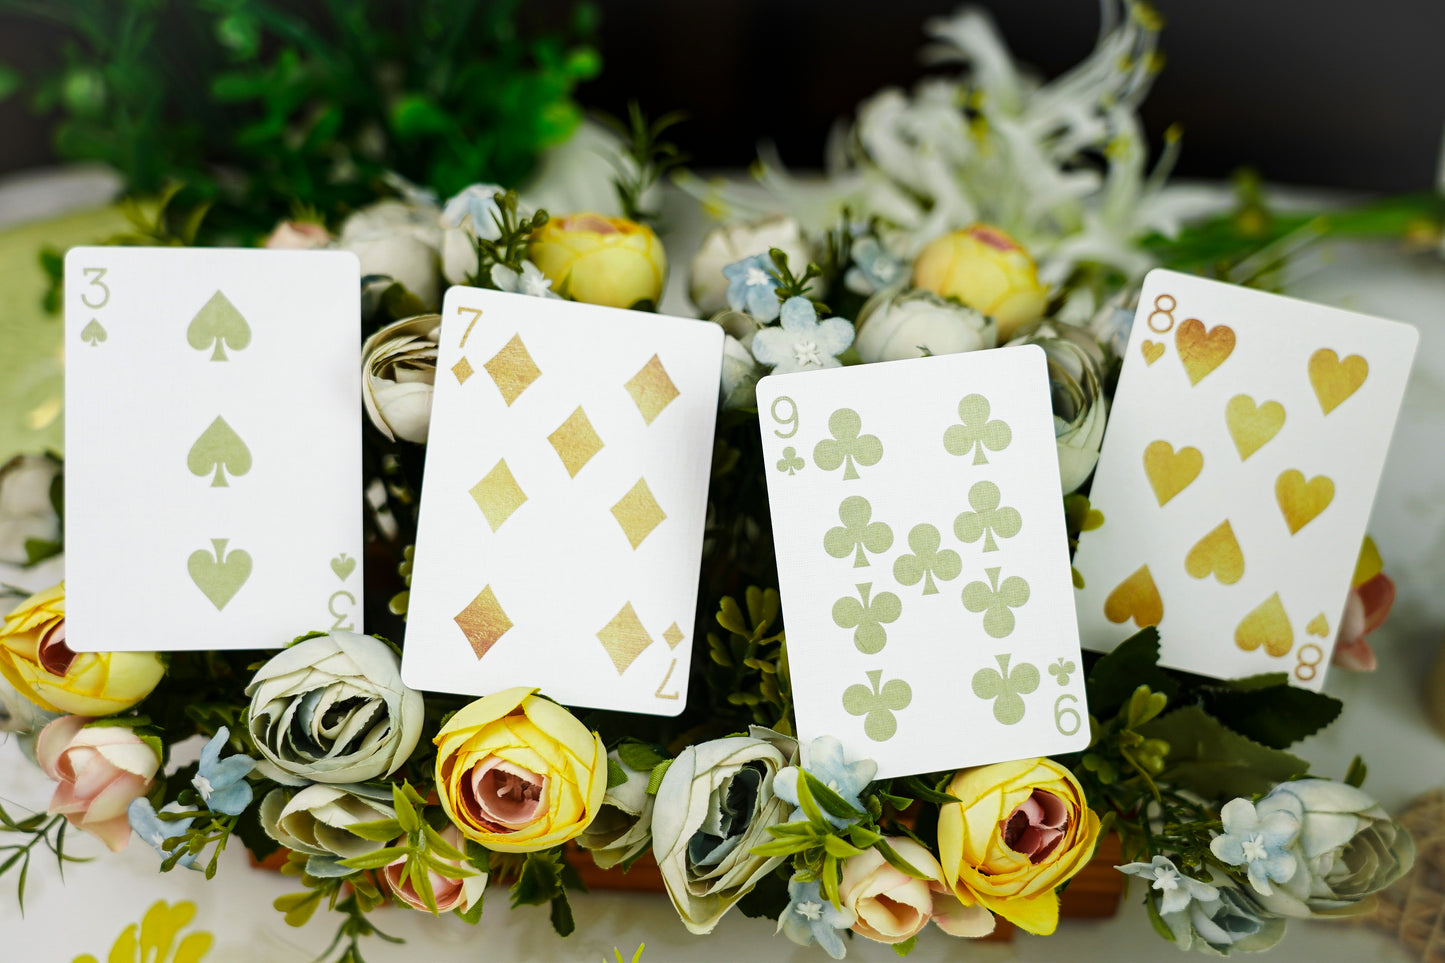 The Language of Flowers Playing Cards by NANA Studio